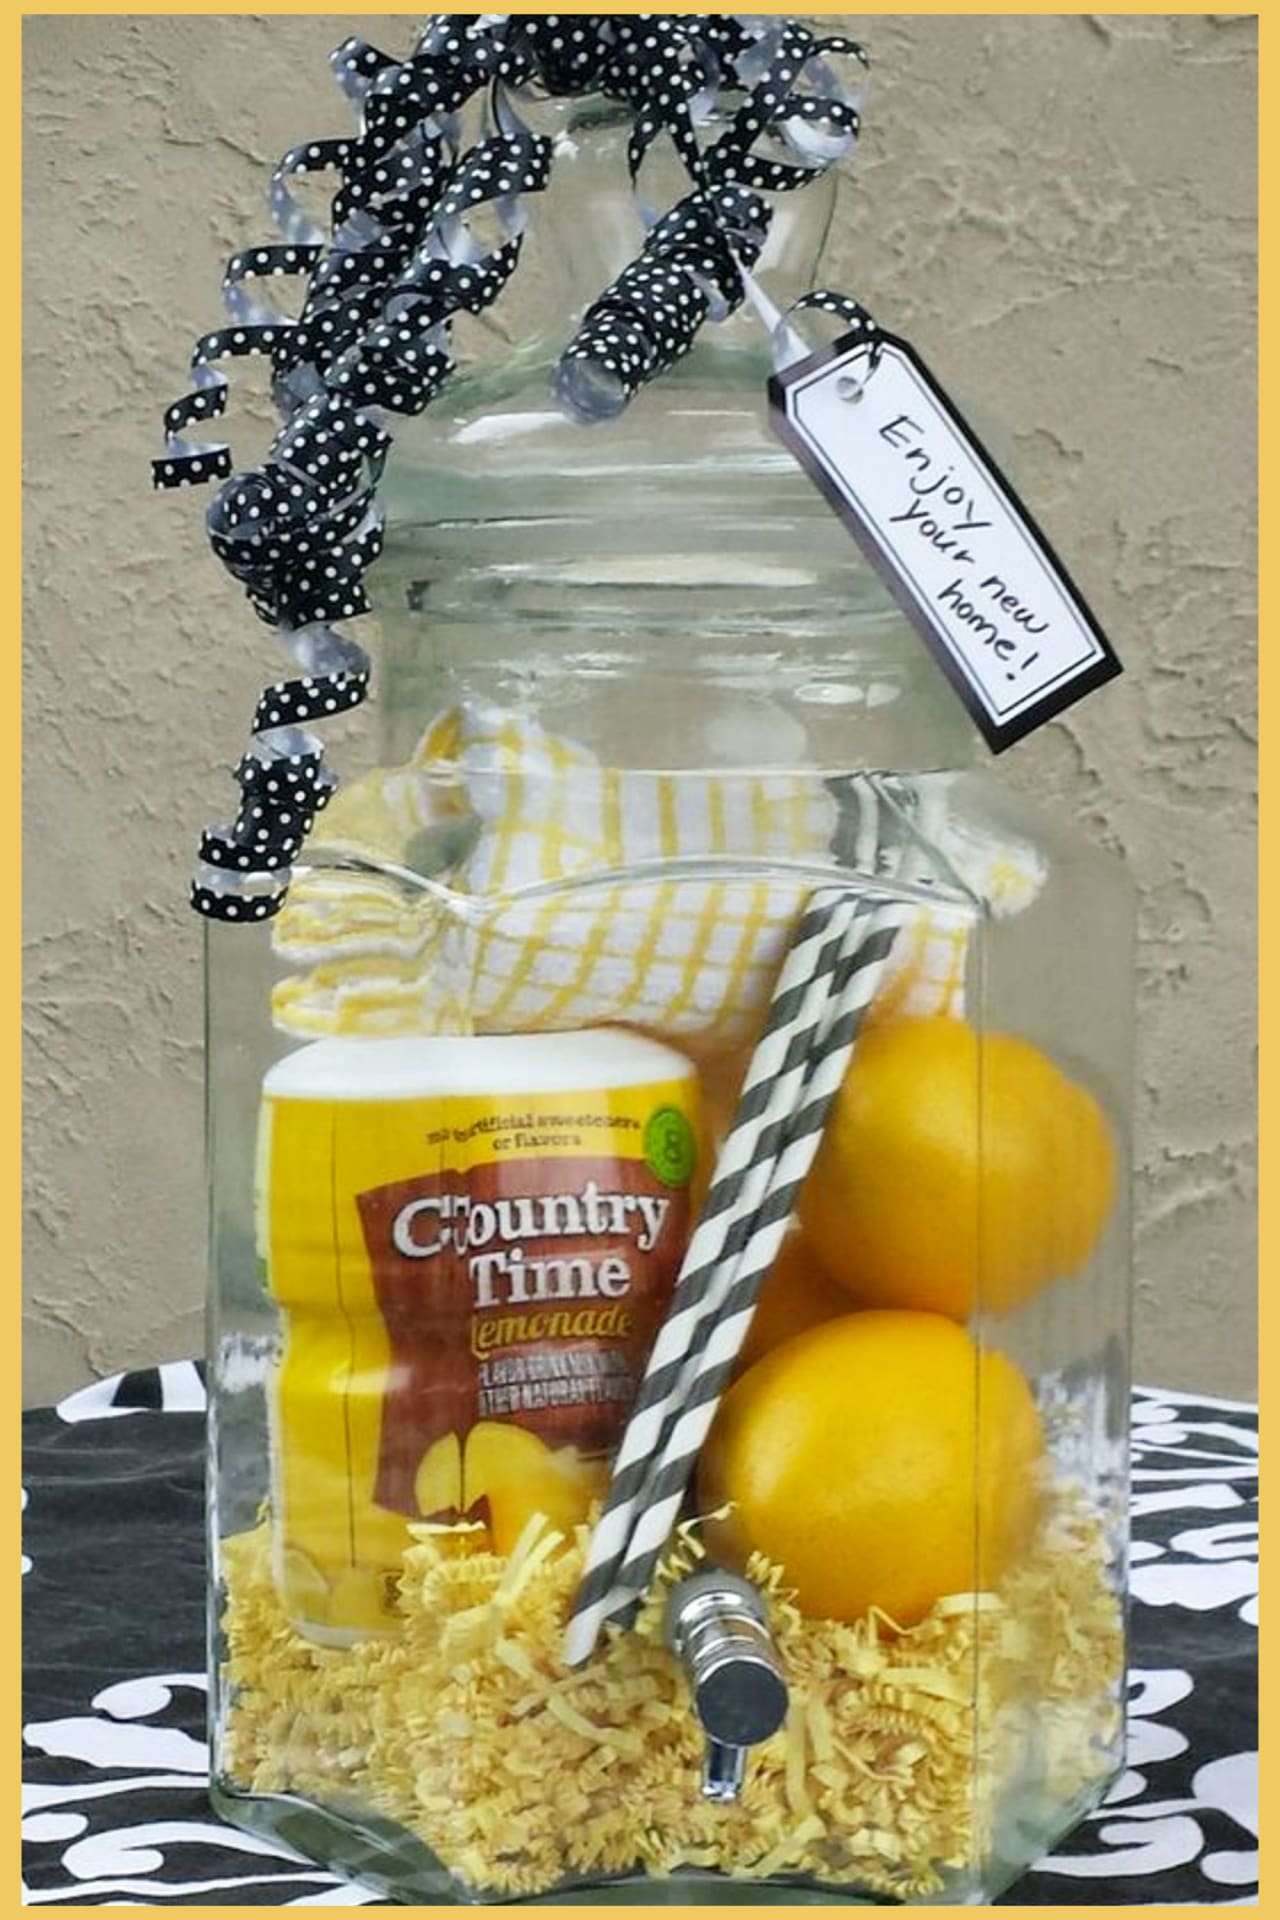 Housewarming Gifts For First Time Homeowners in Their First Home -Unique DIY Housewarming Gift Ideas and DIY Housewarming Gift Baskets They'll Love - First Time Home Buyer Gift Basket - lemonade gift basket ideas